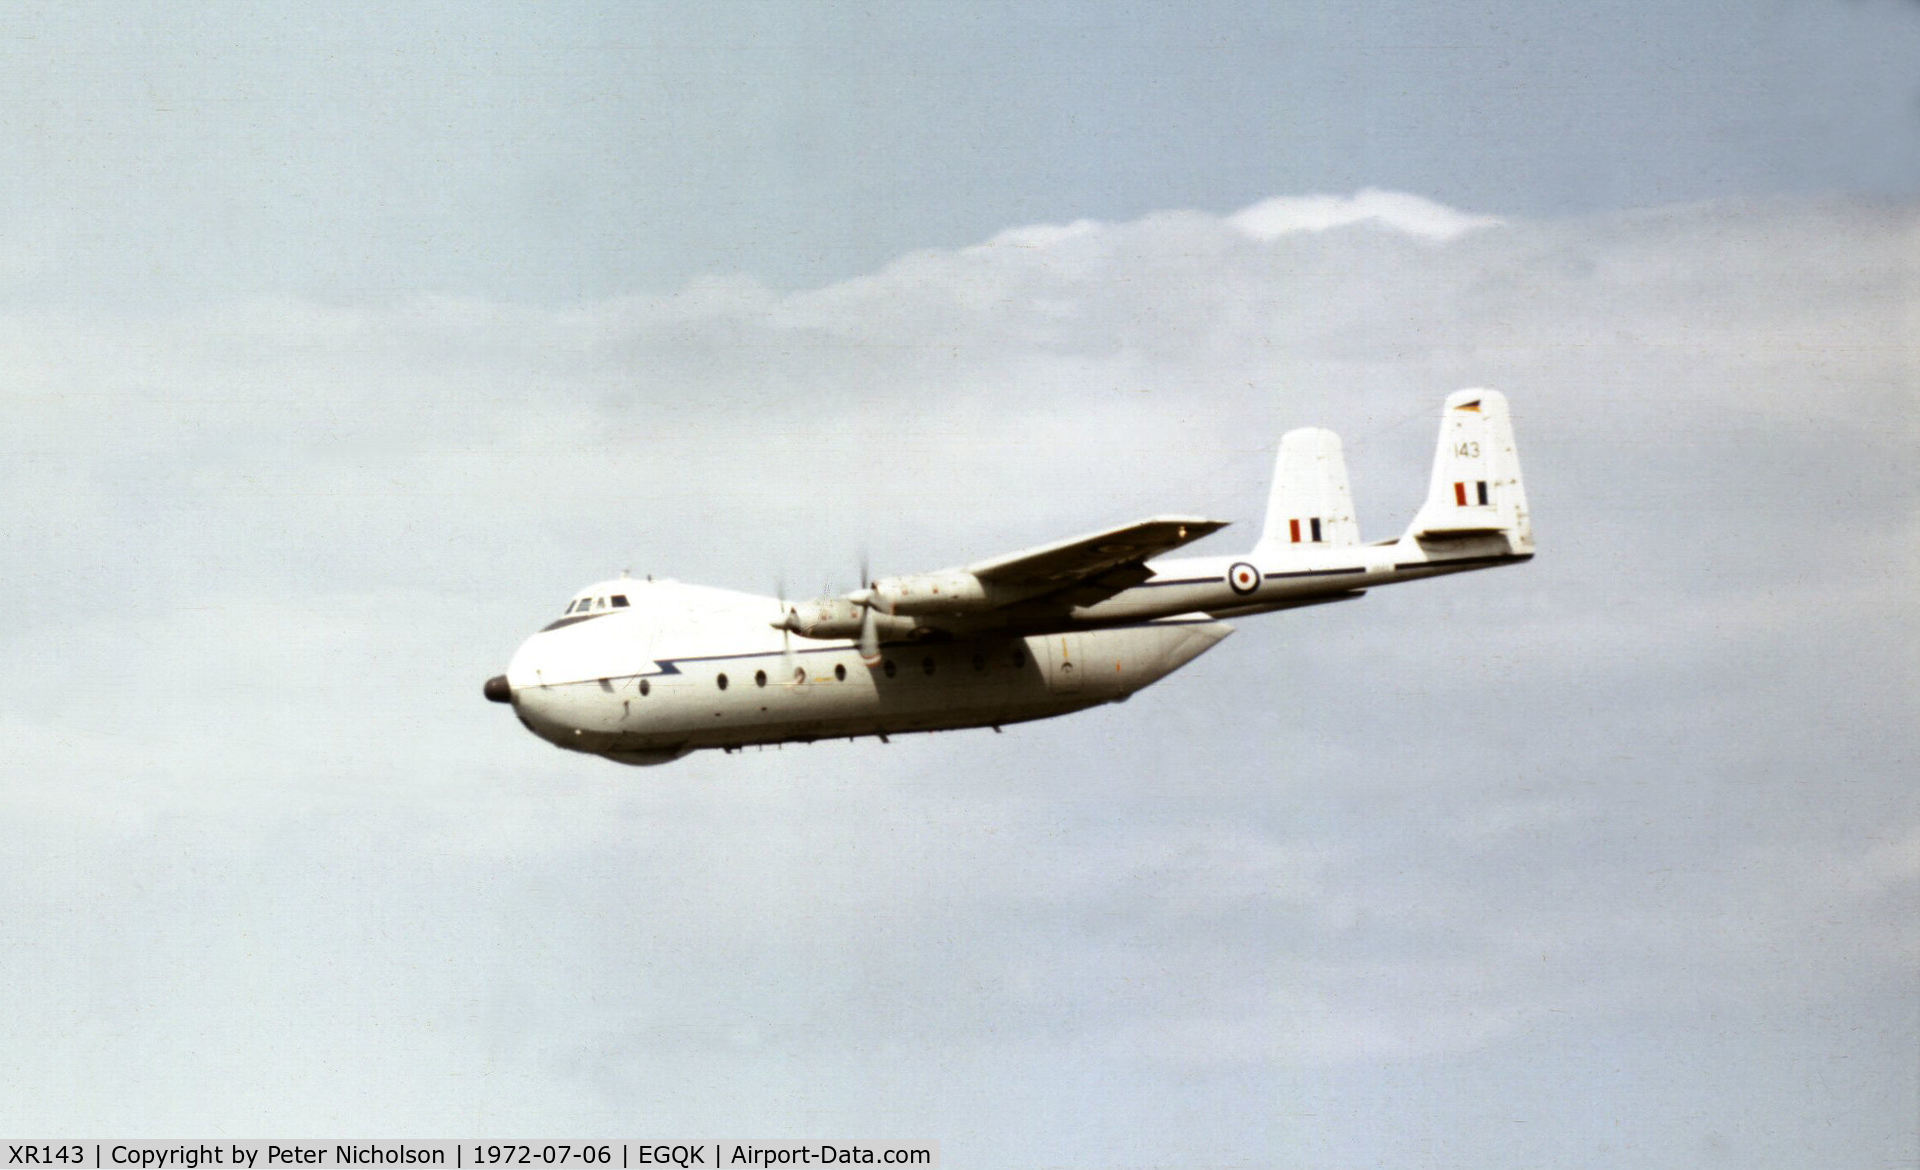 XR143, 1964 Armstrong Whitworth AW660 Argosy E.1 C/N 6798, Argosy E.1 of 115 Squadron on final approach to RAF Kinloss in the Summer of 1972.